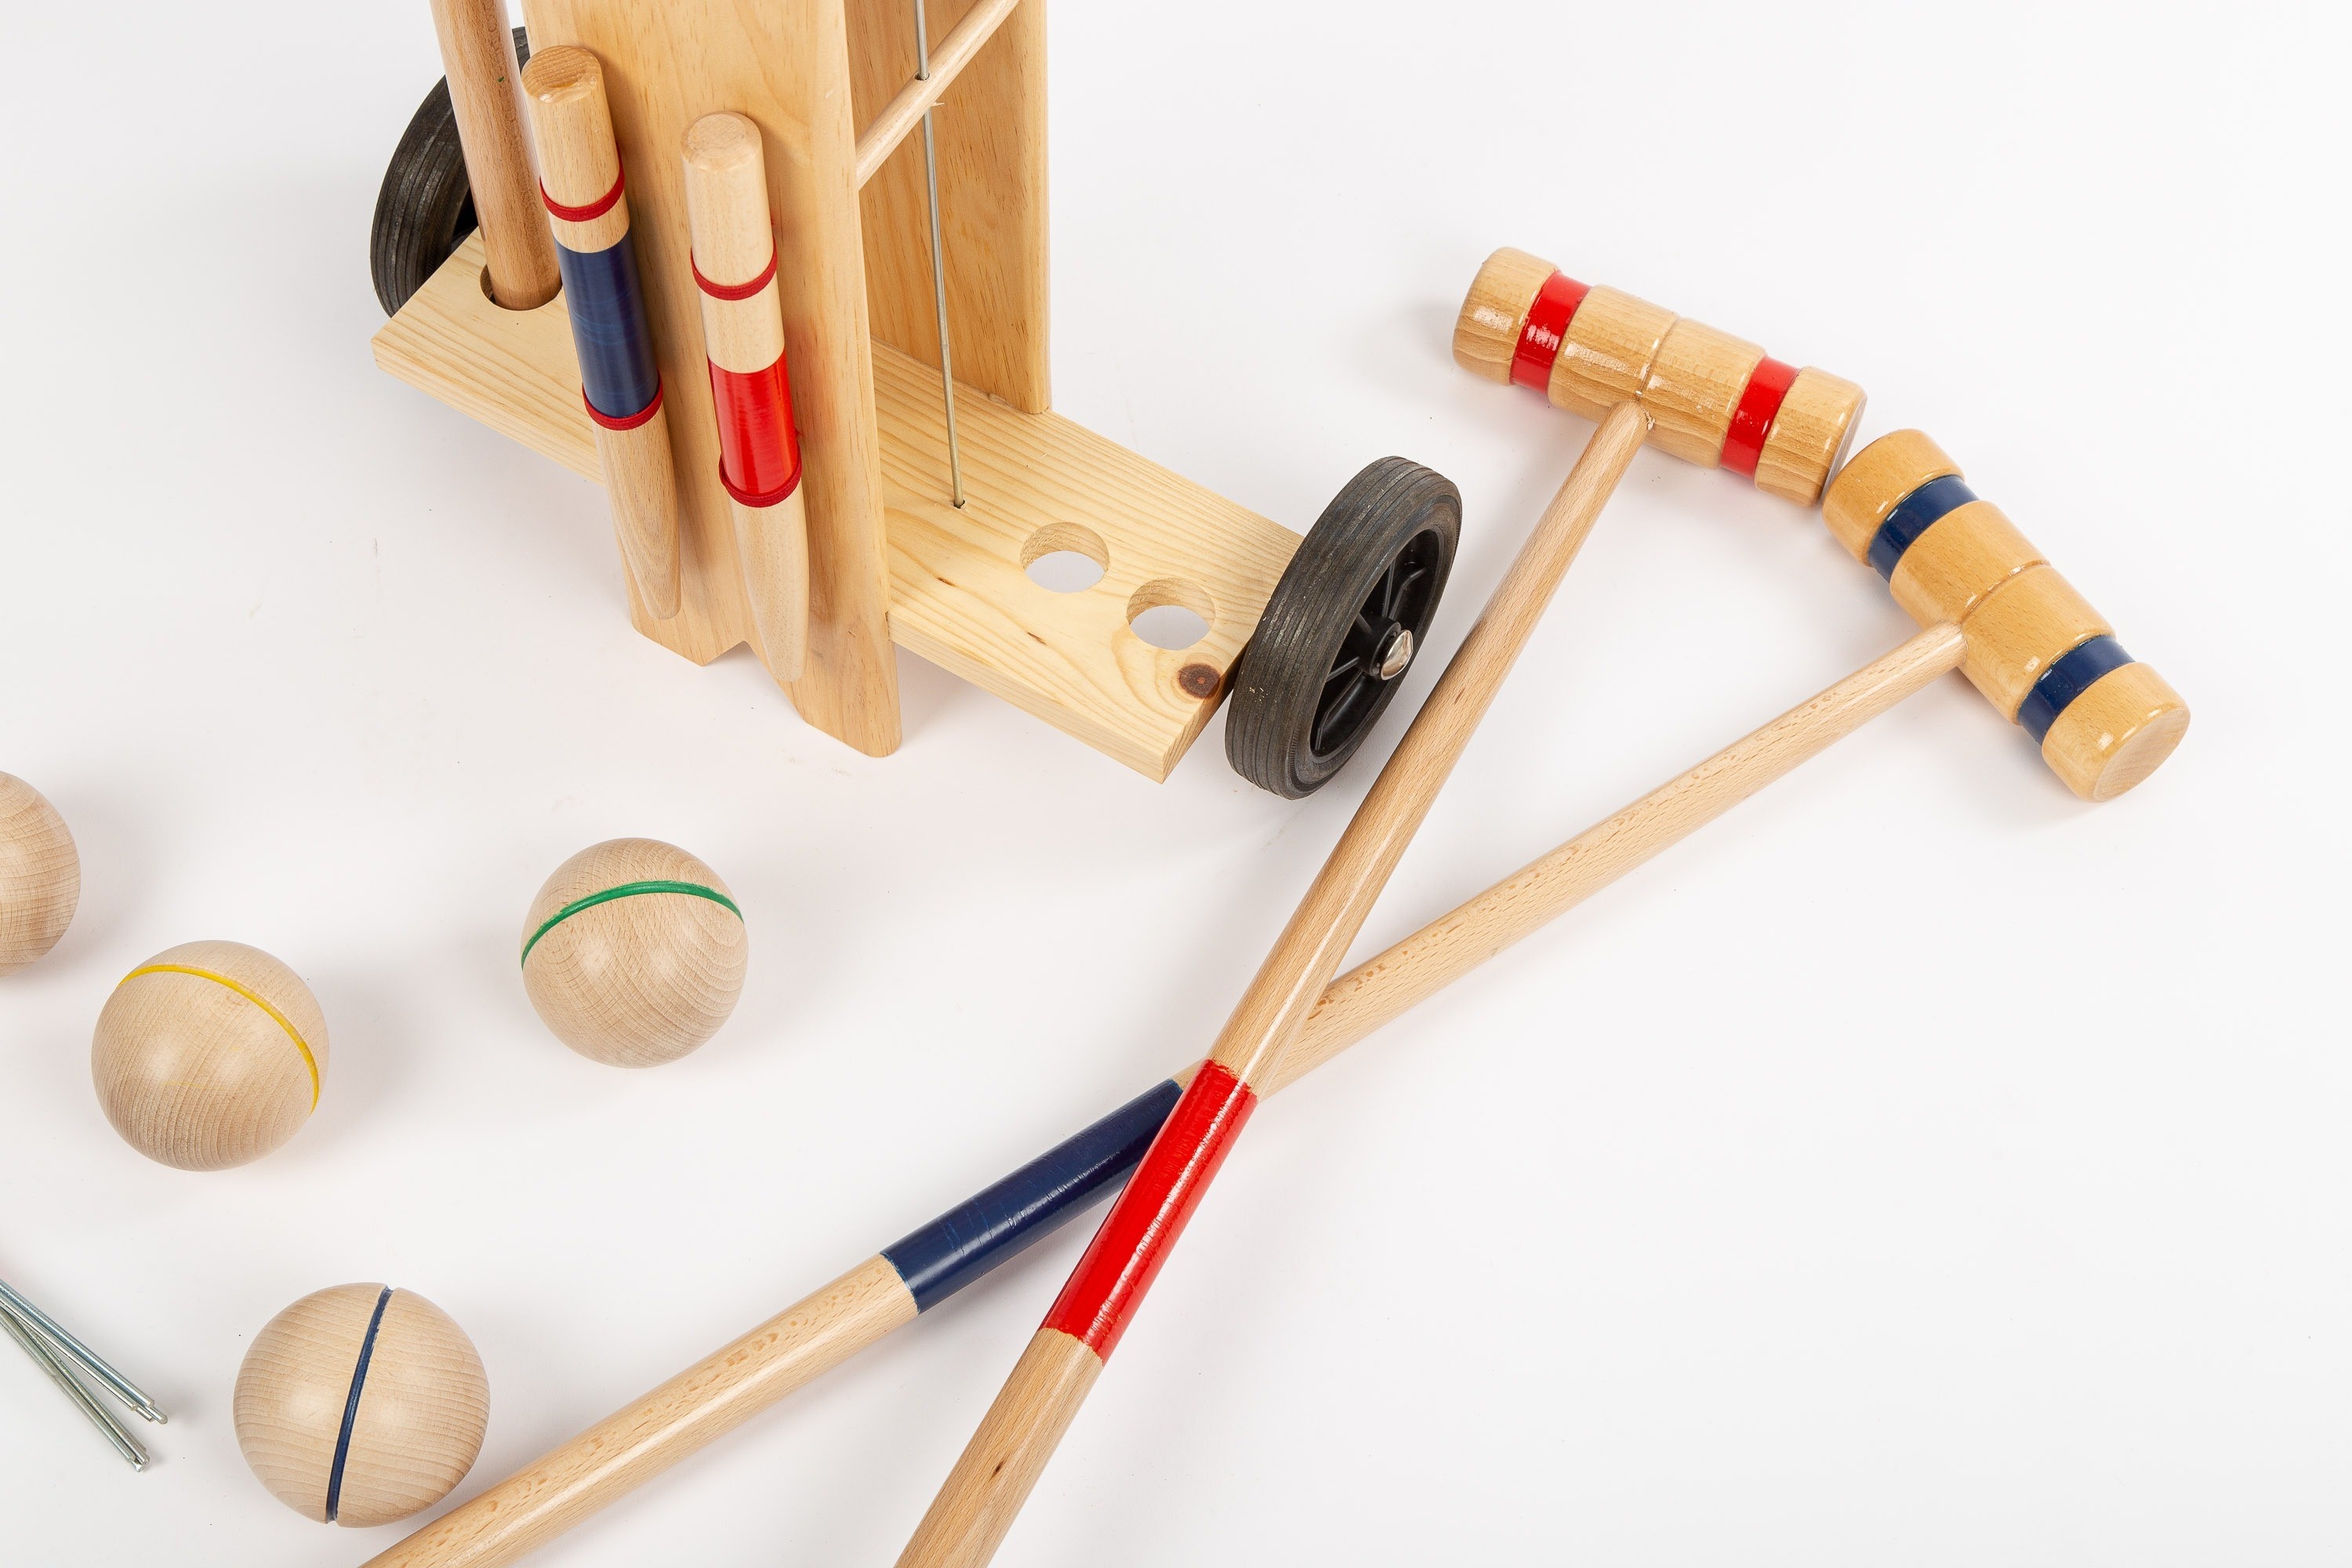 Croquet: Croquet game in the wooden trolley: 4 players, 4 clubs, 4 balls of different colors, 8 bridges, a hammer, and two punches. 3000x2000 HD Wallpaper.